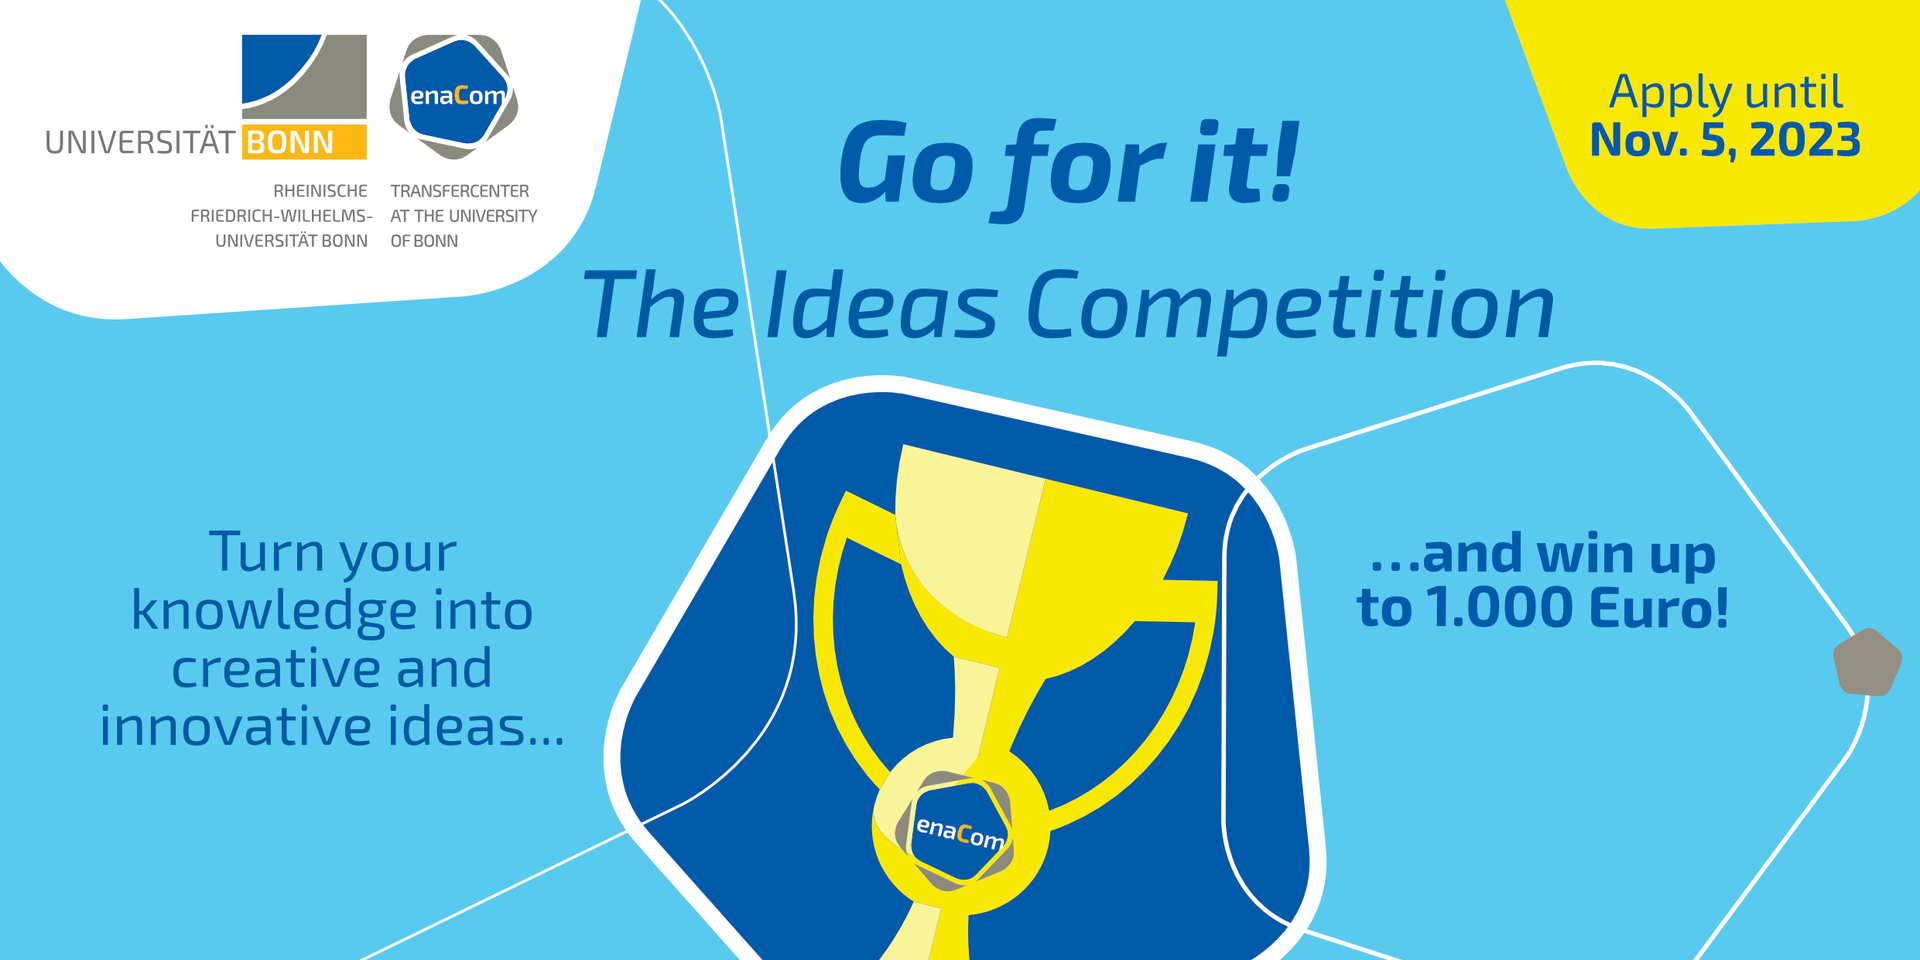 The Ideas Competition by Transfer Center enaCom